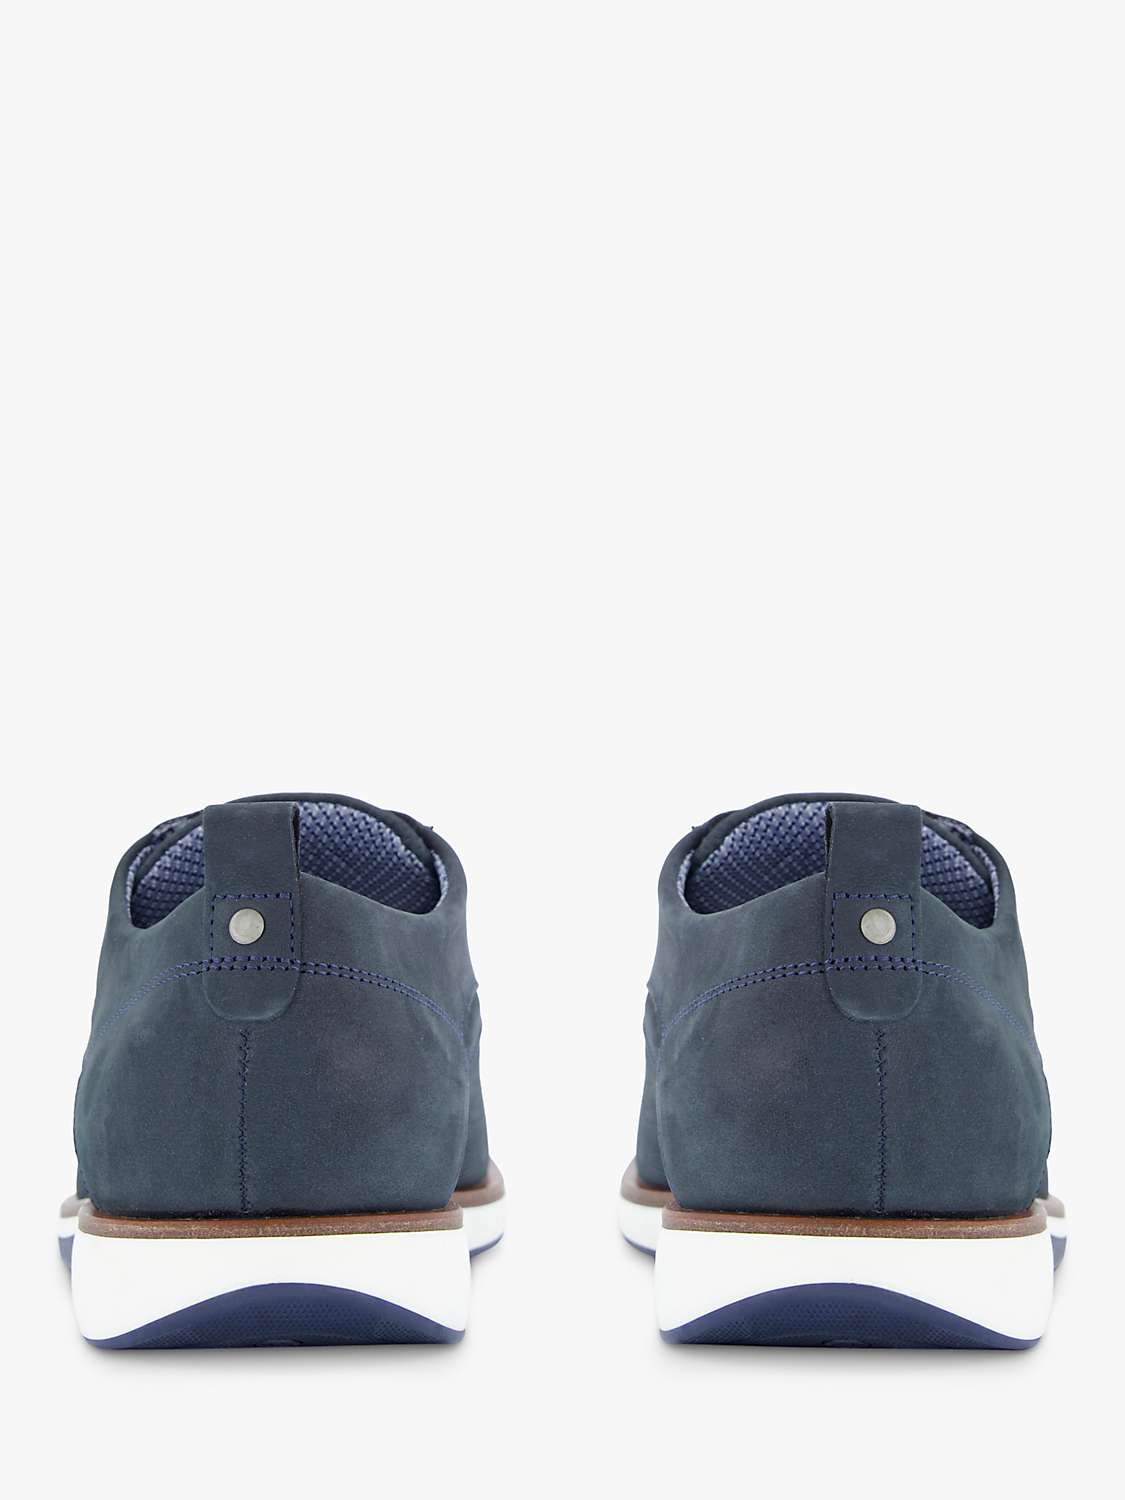 Buy Dune Balad Nubuck Punch Hole Casual Shoes Online at johnlewis.com